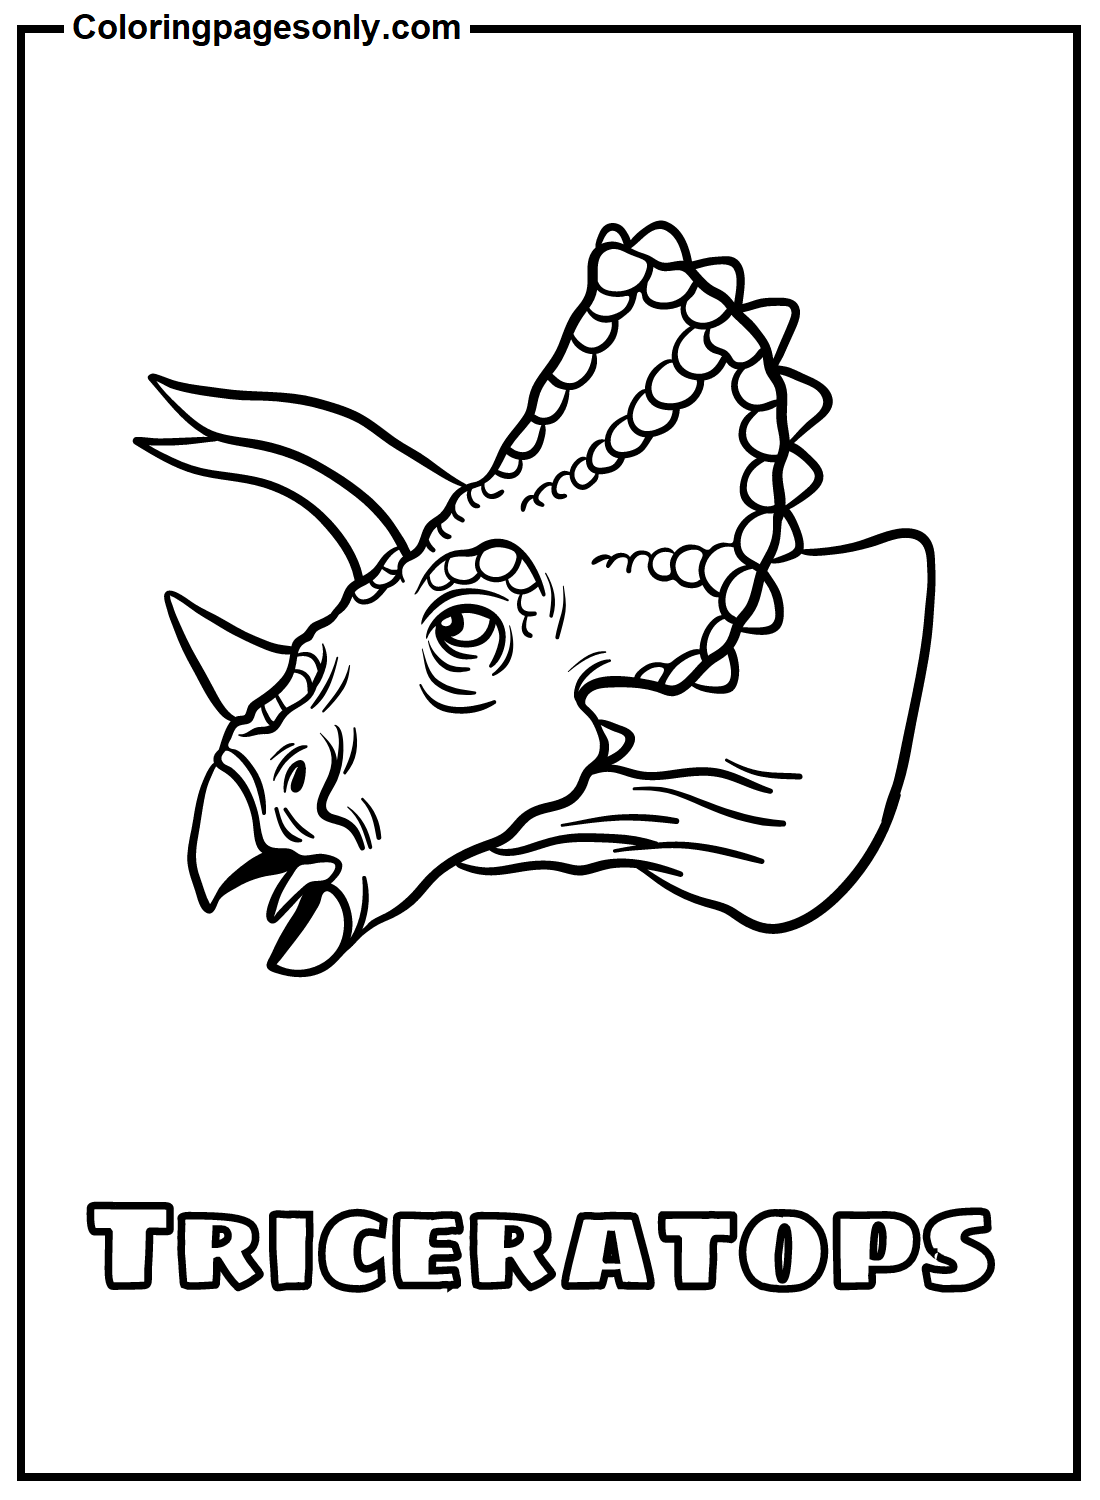 Triceratops Free Coloring Pages